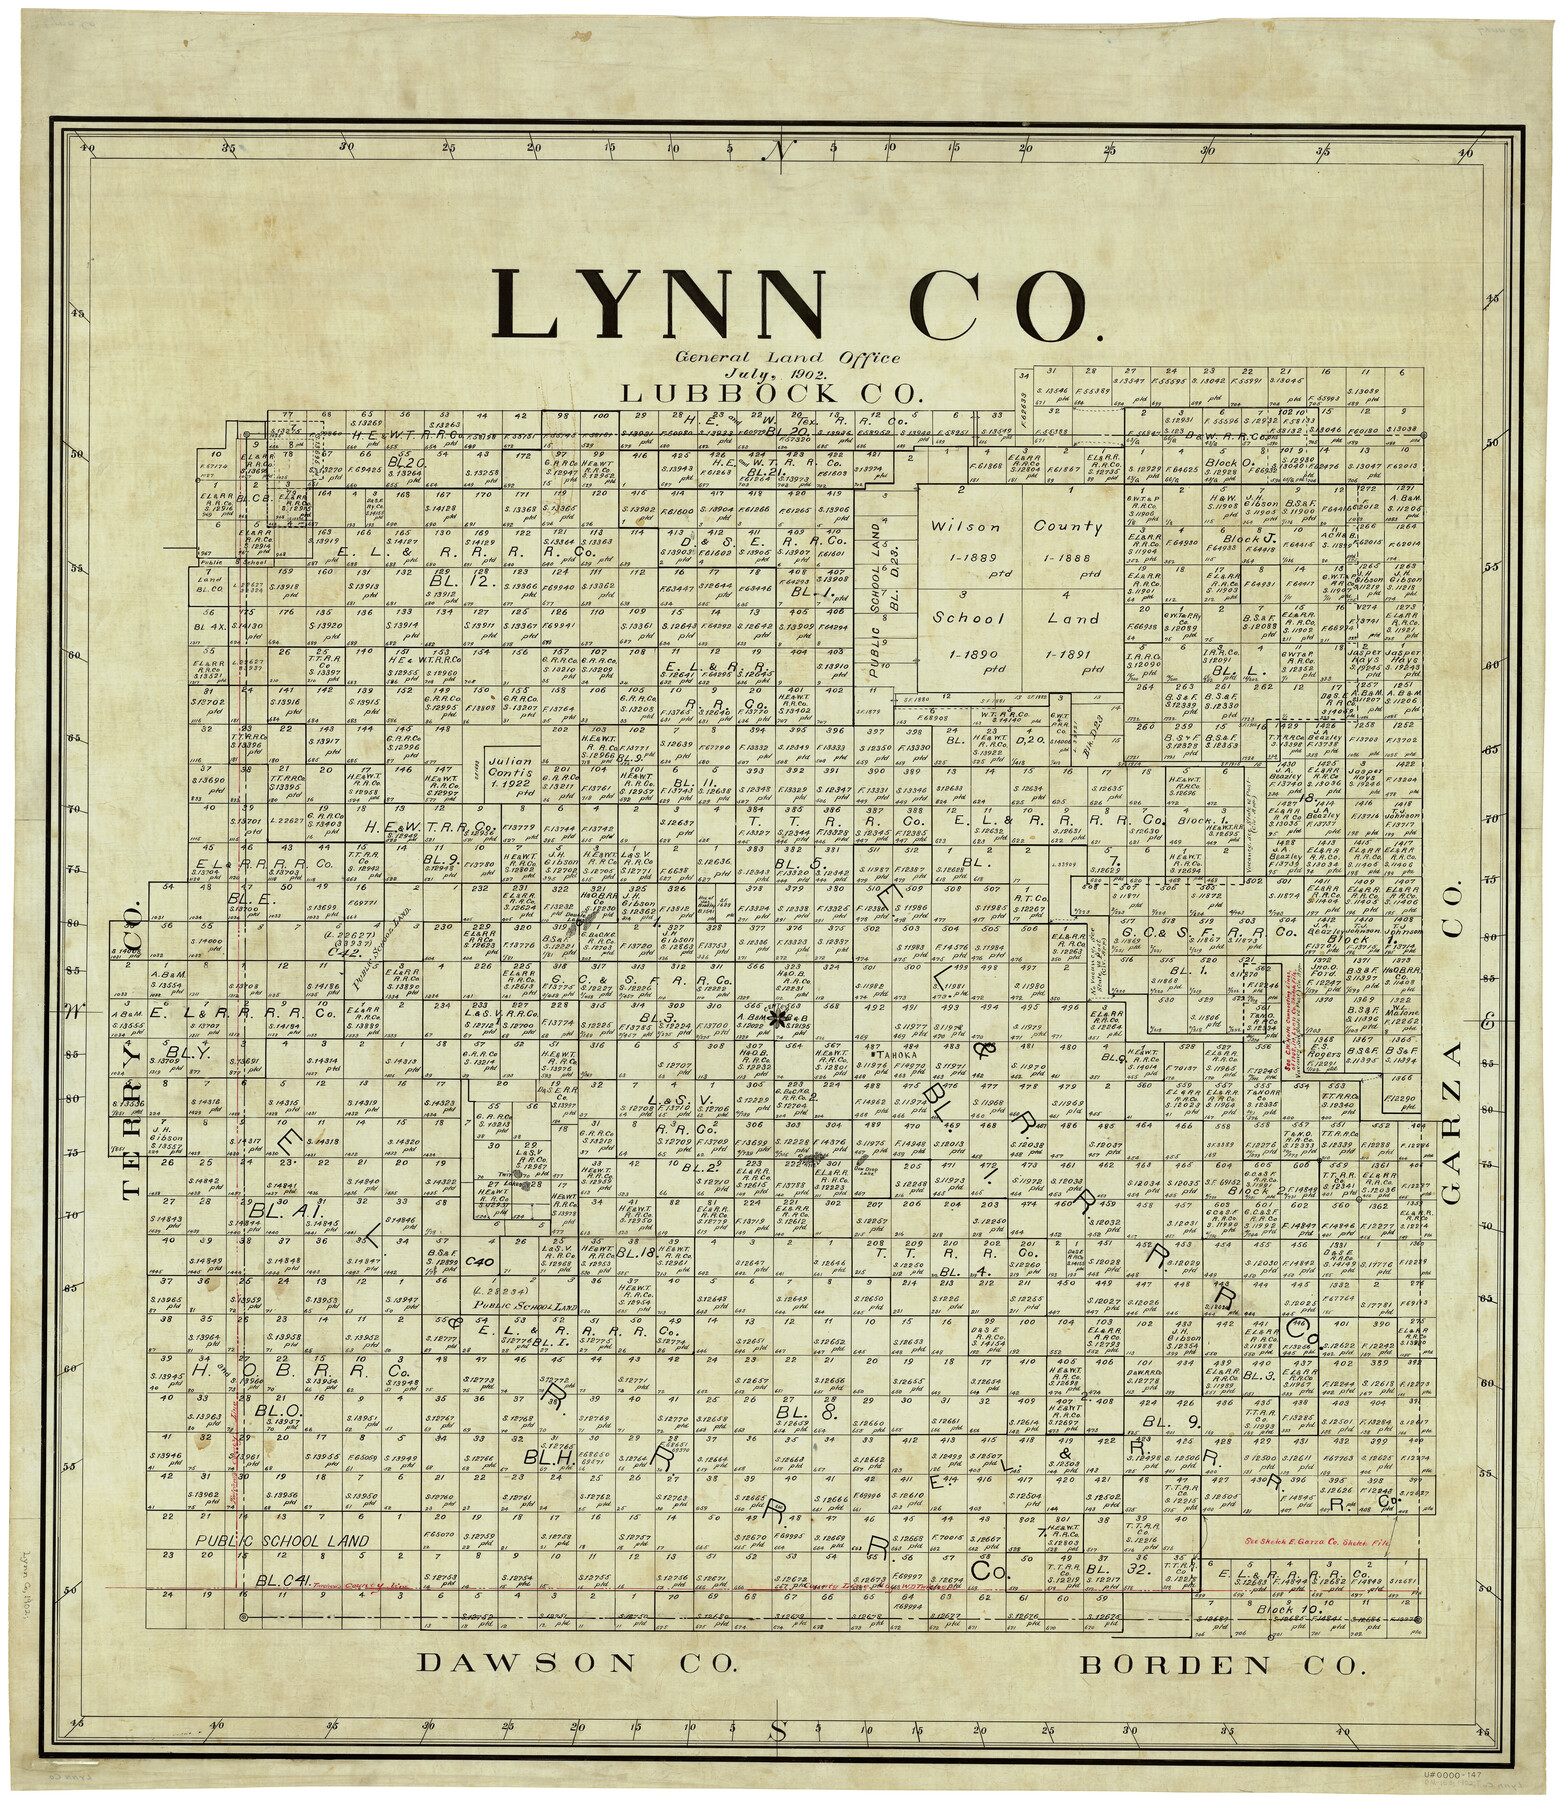 5028, Lynn Co., General Map Collection